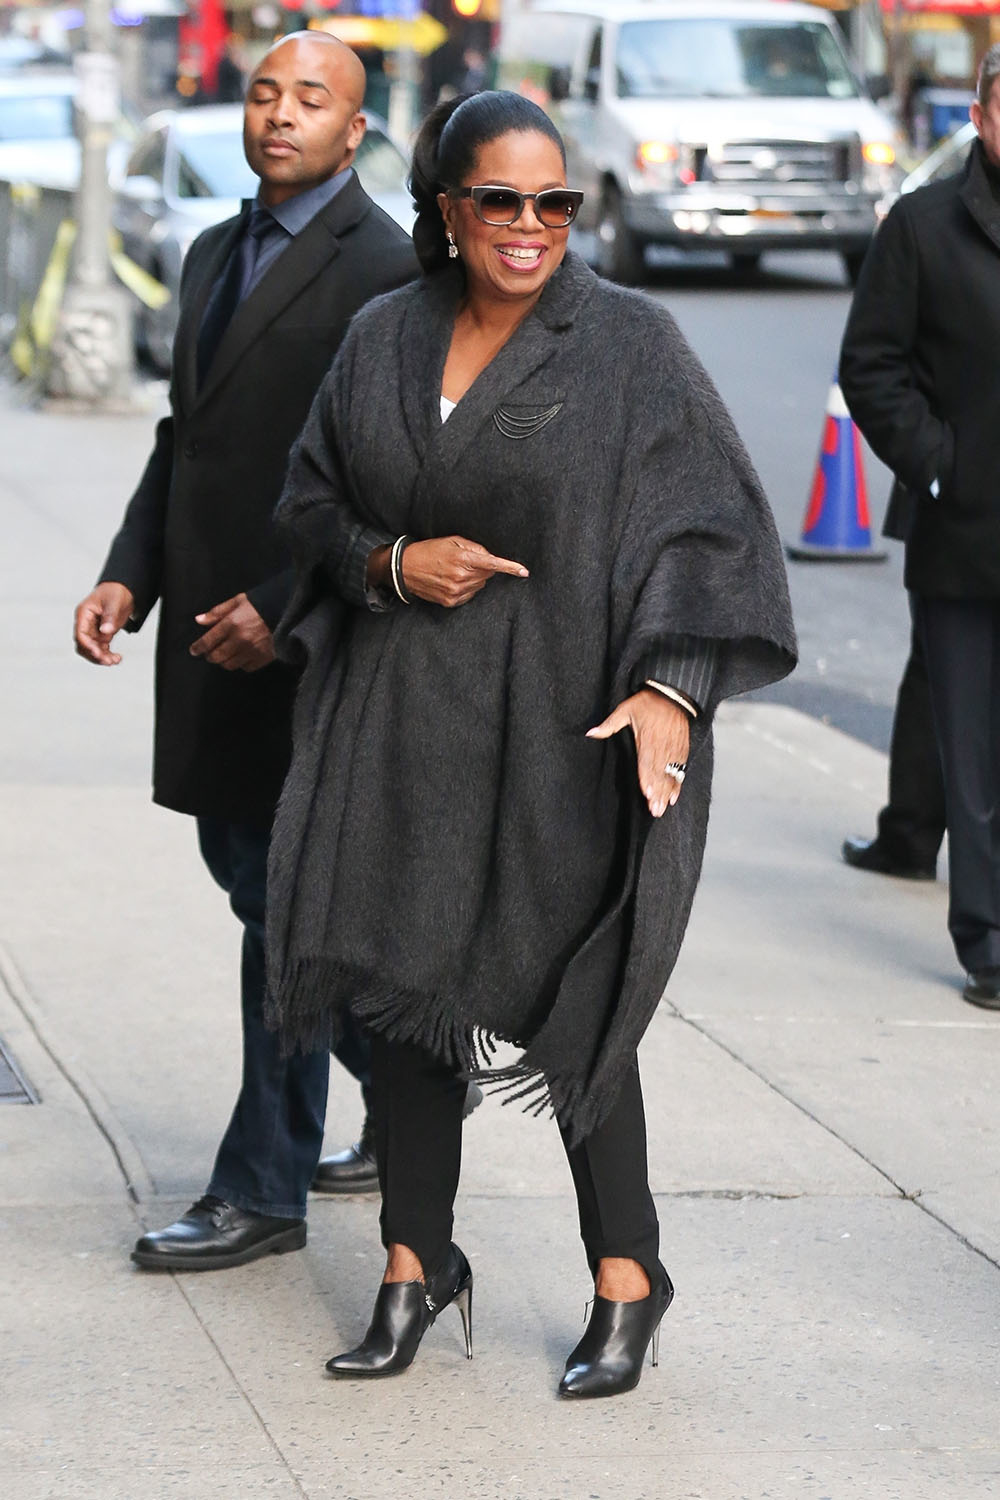 Oprah Winfrey seen arriving at The Late Show in NYC | Sandra Rose